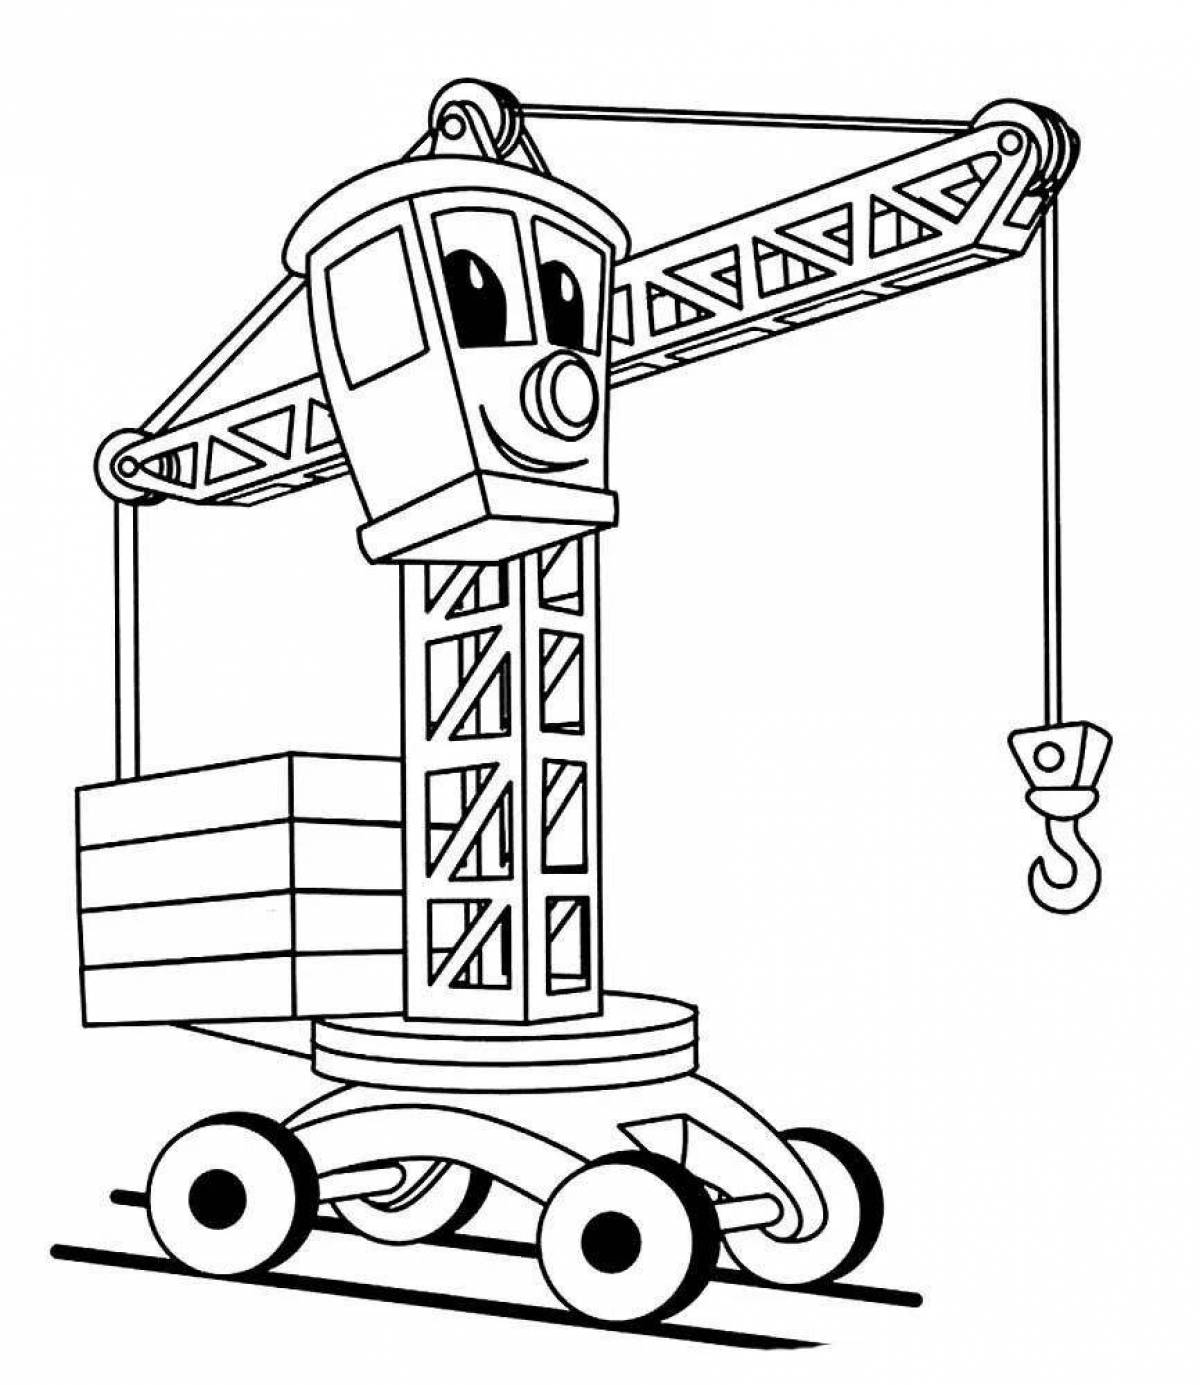 Adorable truck crane coloring book for beginners